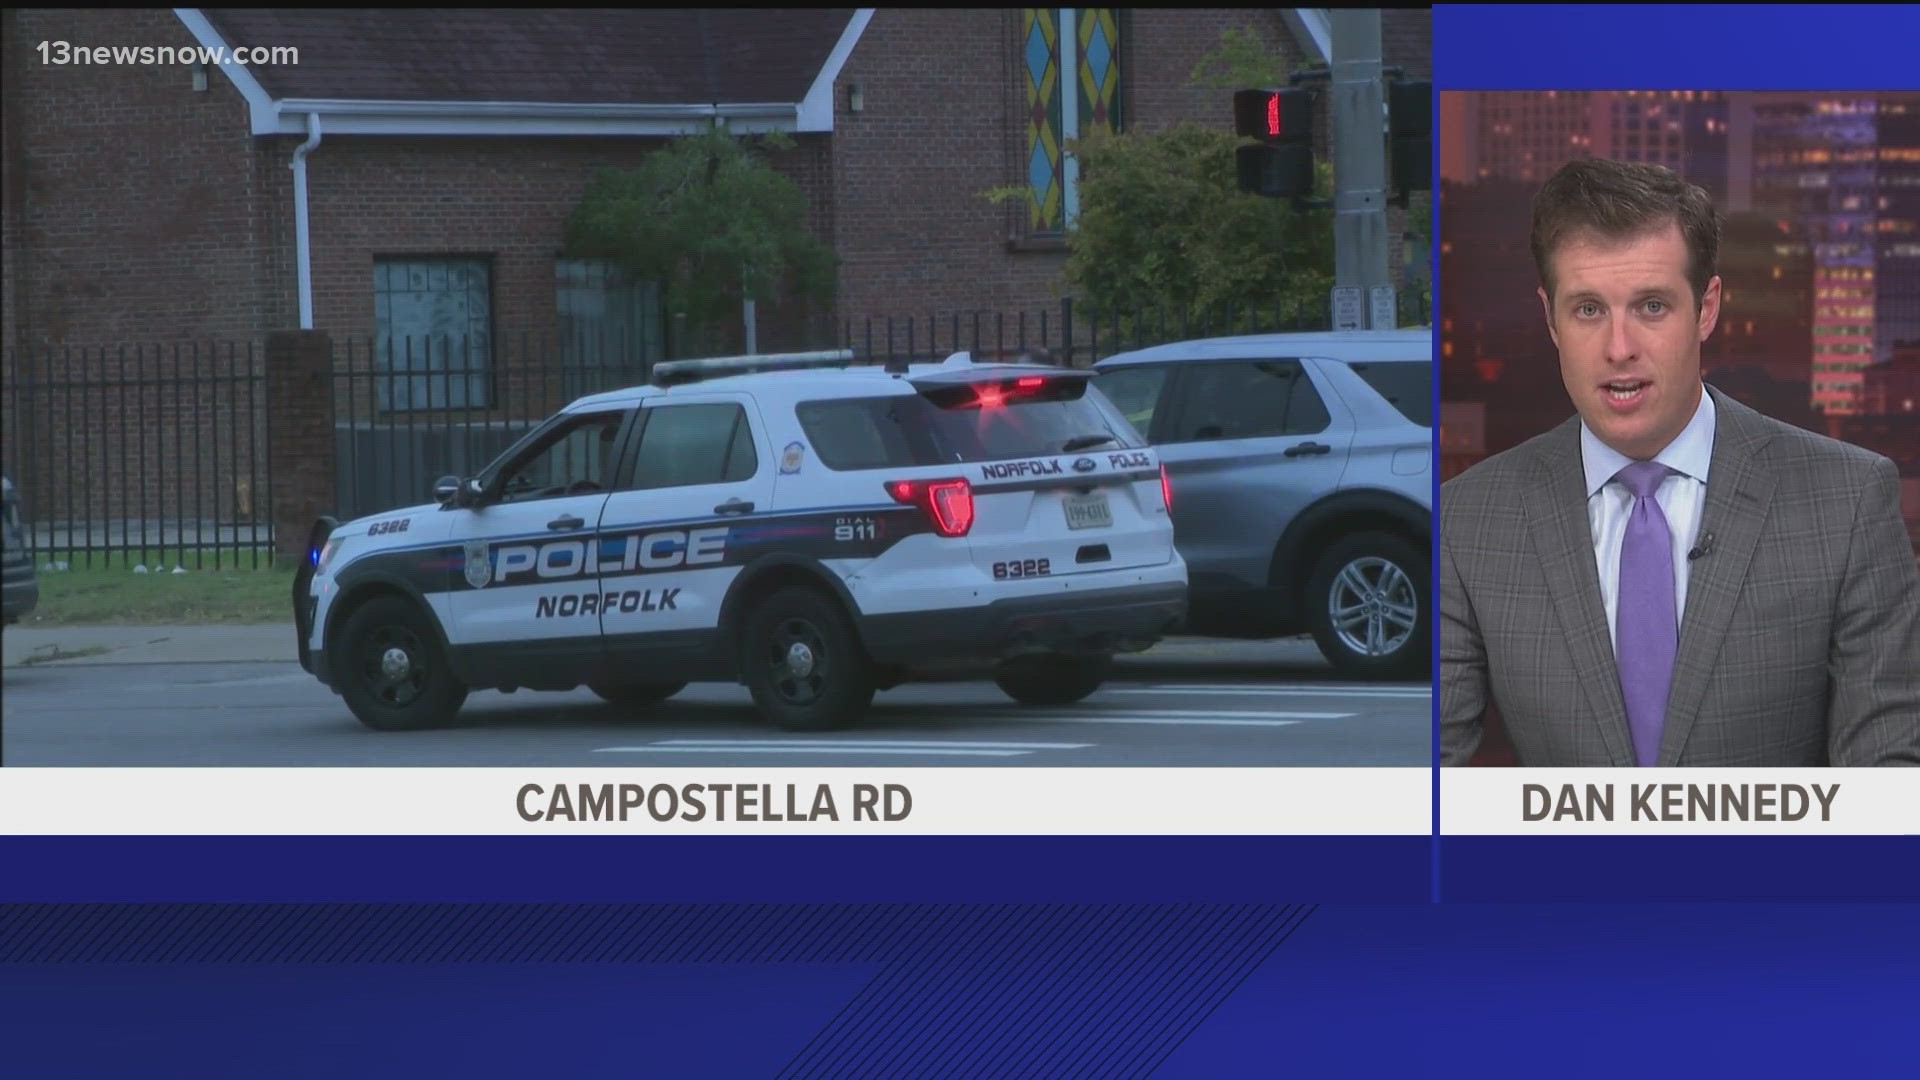 The shooting happened in the 300 block of Campostella Road.